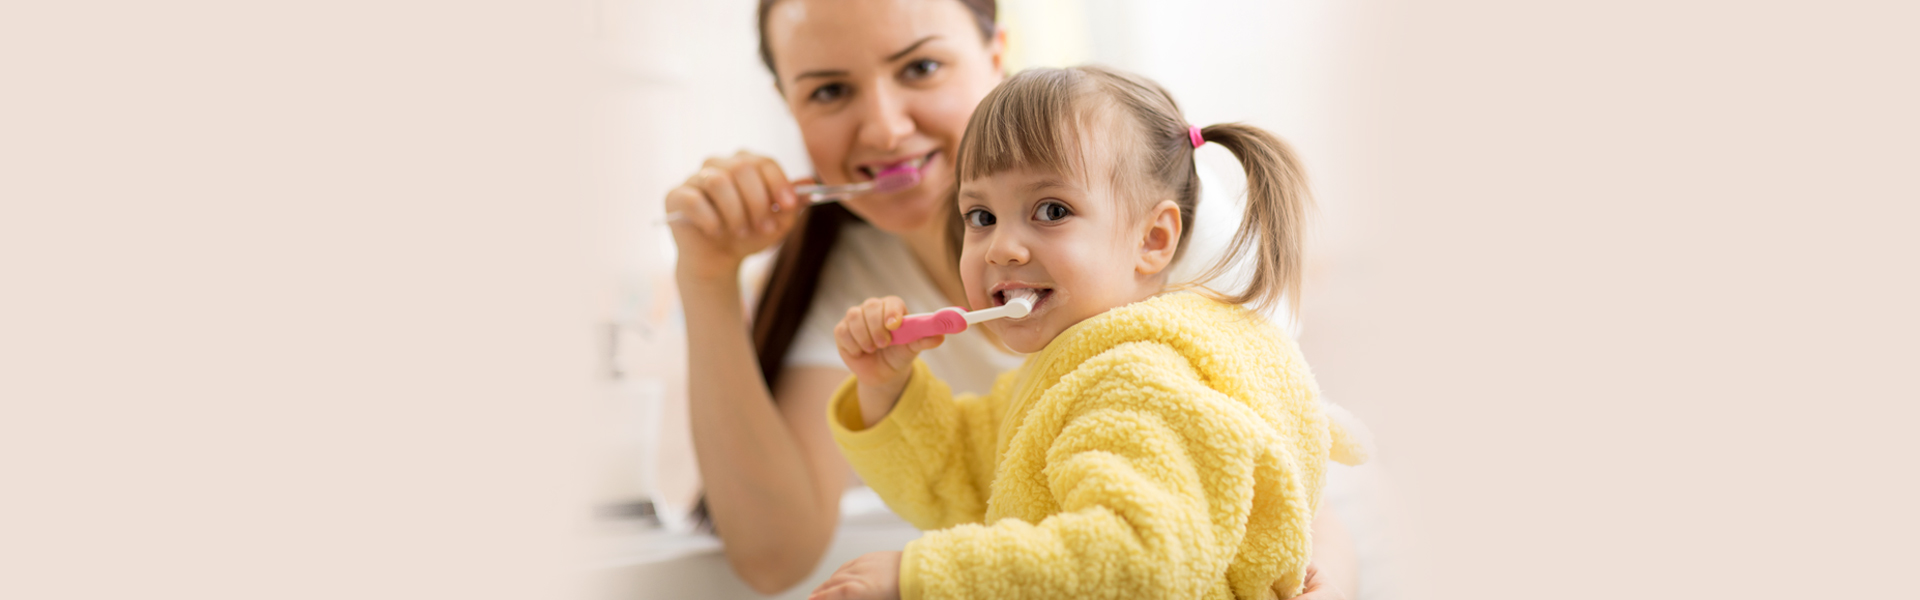 Which Type of Dental Sealant is Used for Adolescents and Kids?